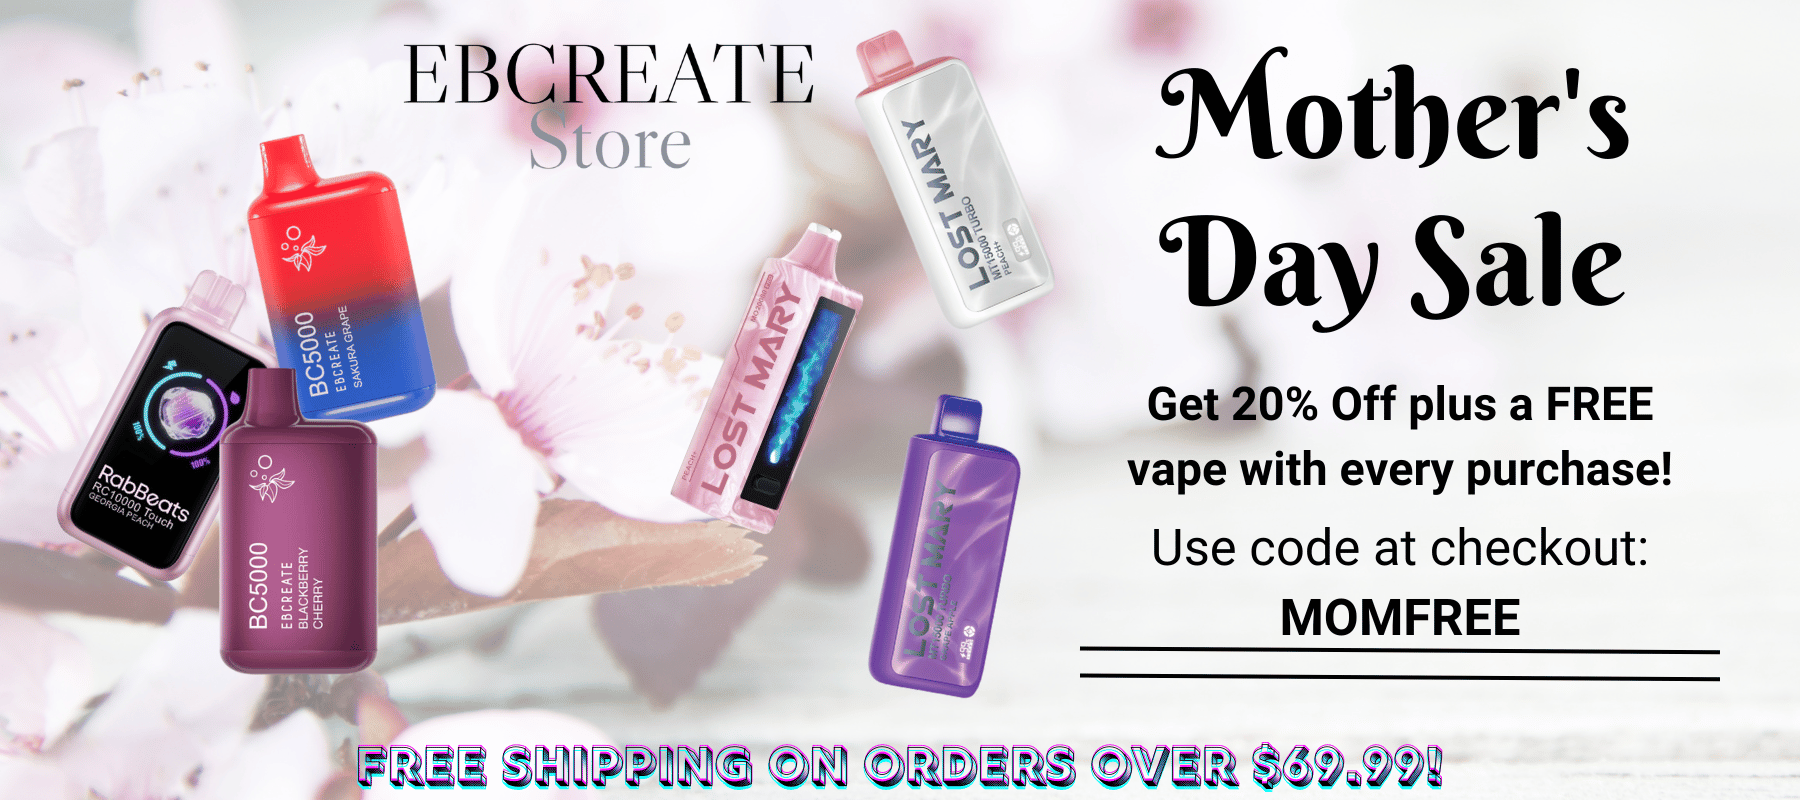 ebcreate mother day sale banner